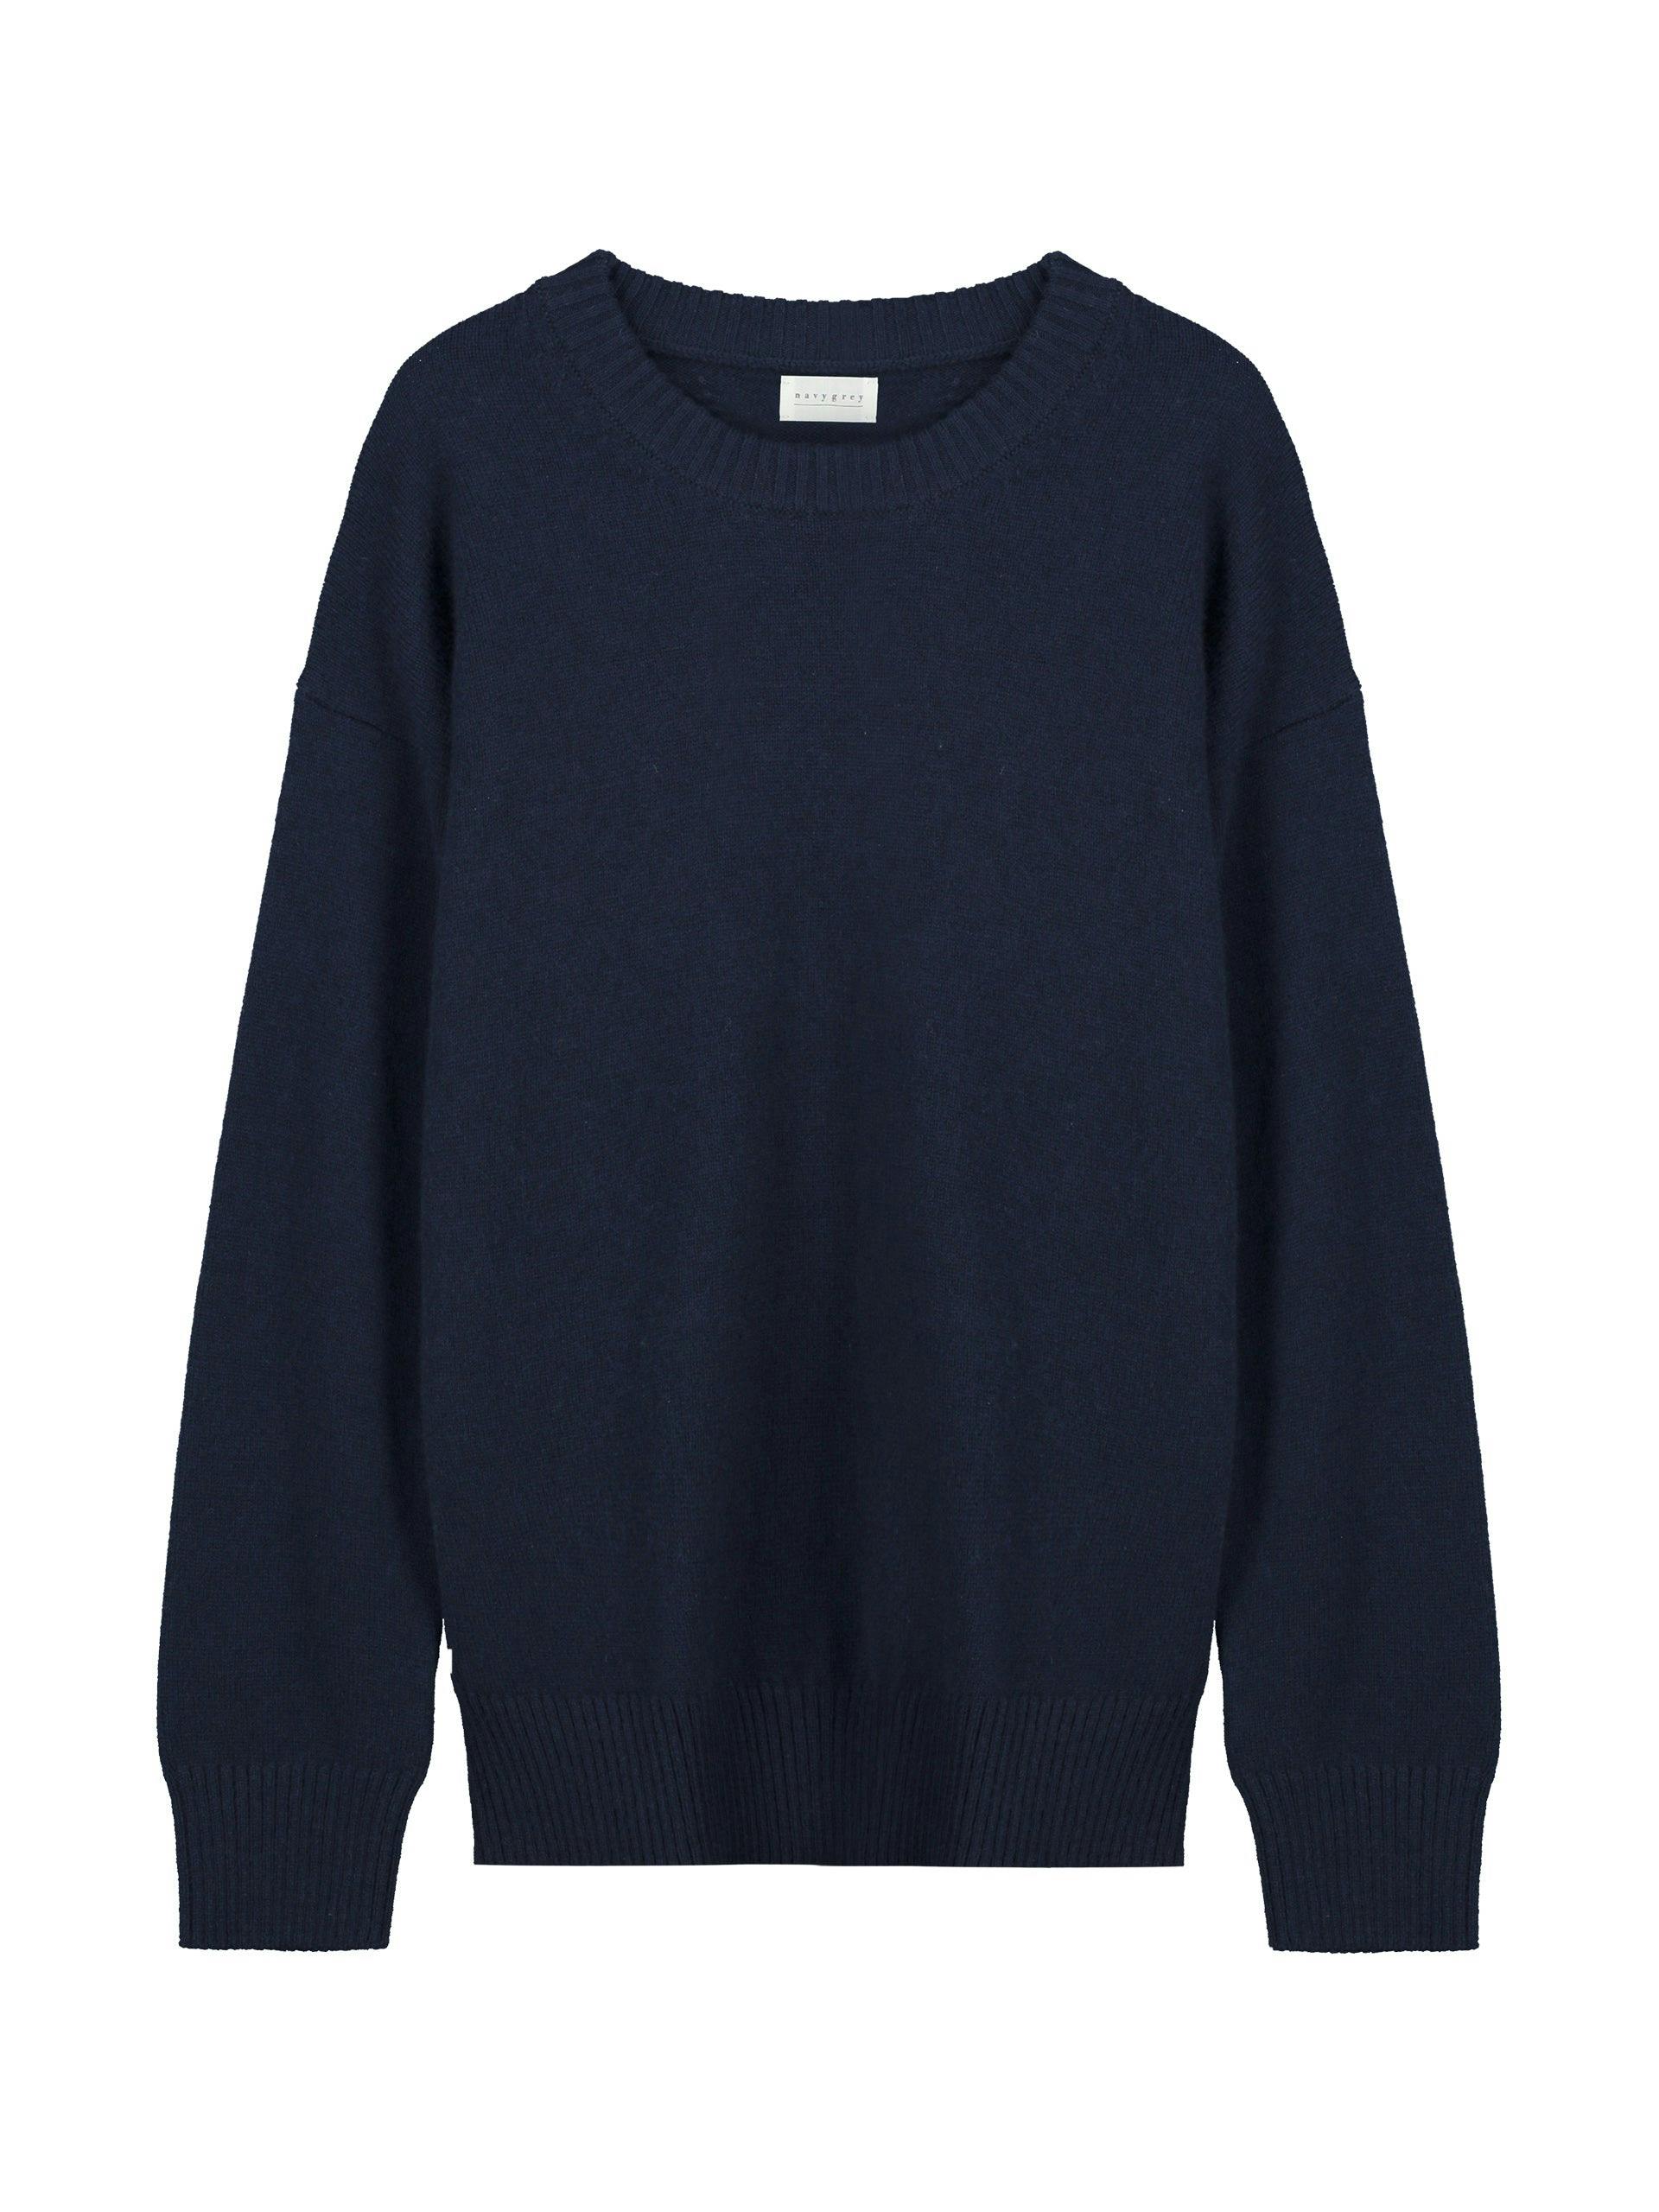 The Relaxed knit in navy